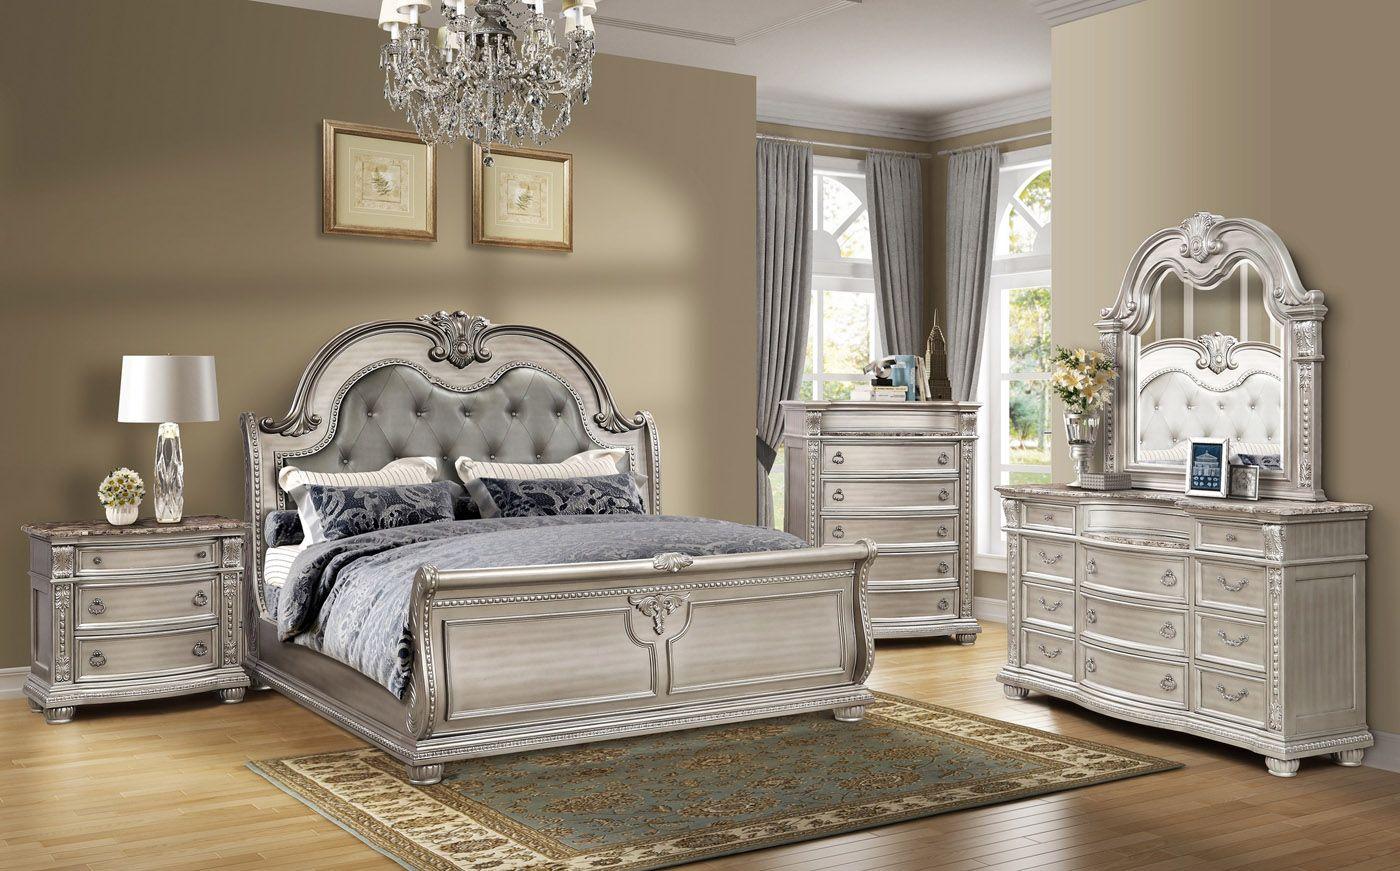 

    
Antique Platinum Button Tufted Sleigh CAL King Bedroom Set 5Pcs w/Chest Traditional Mcferran B9506
